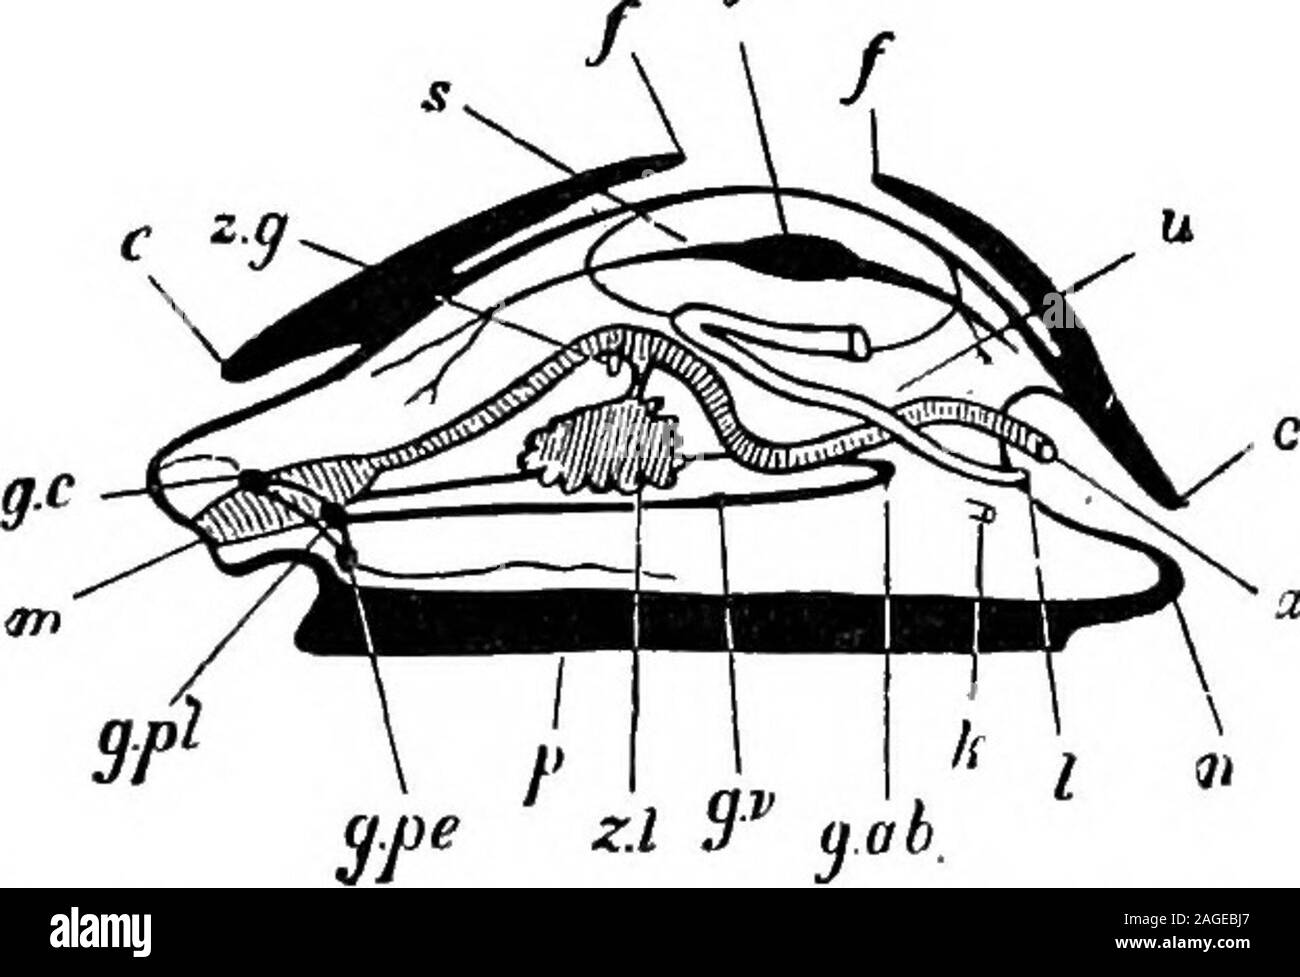 . Outlines of zoology. res, Molluscs resemble Annelids, but it is probablethat they took their origin from a still lower level. General Characters Molluscs are unsegmented and without appendages. Thesymmetry is fundamentally bilateral, but this is lost in mostGasteropods. The foot—a muscular protrtision of theventral surface—is very characteristic; it tisually serves forlocomotion, but is much modified according to habit. Typically,a projecting dorsal fold of the body-wall forms a mantle, orpallium (Fig. 20Sj c-), i^hich often secretes a single or bilobedshell covering the viscera, and roofs i Stock Photo